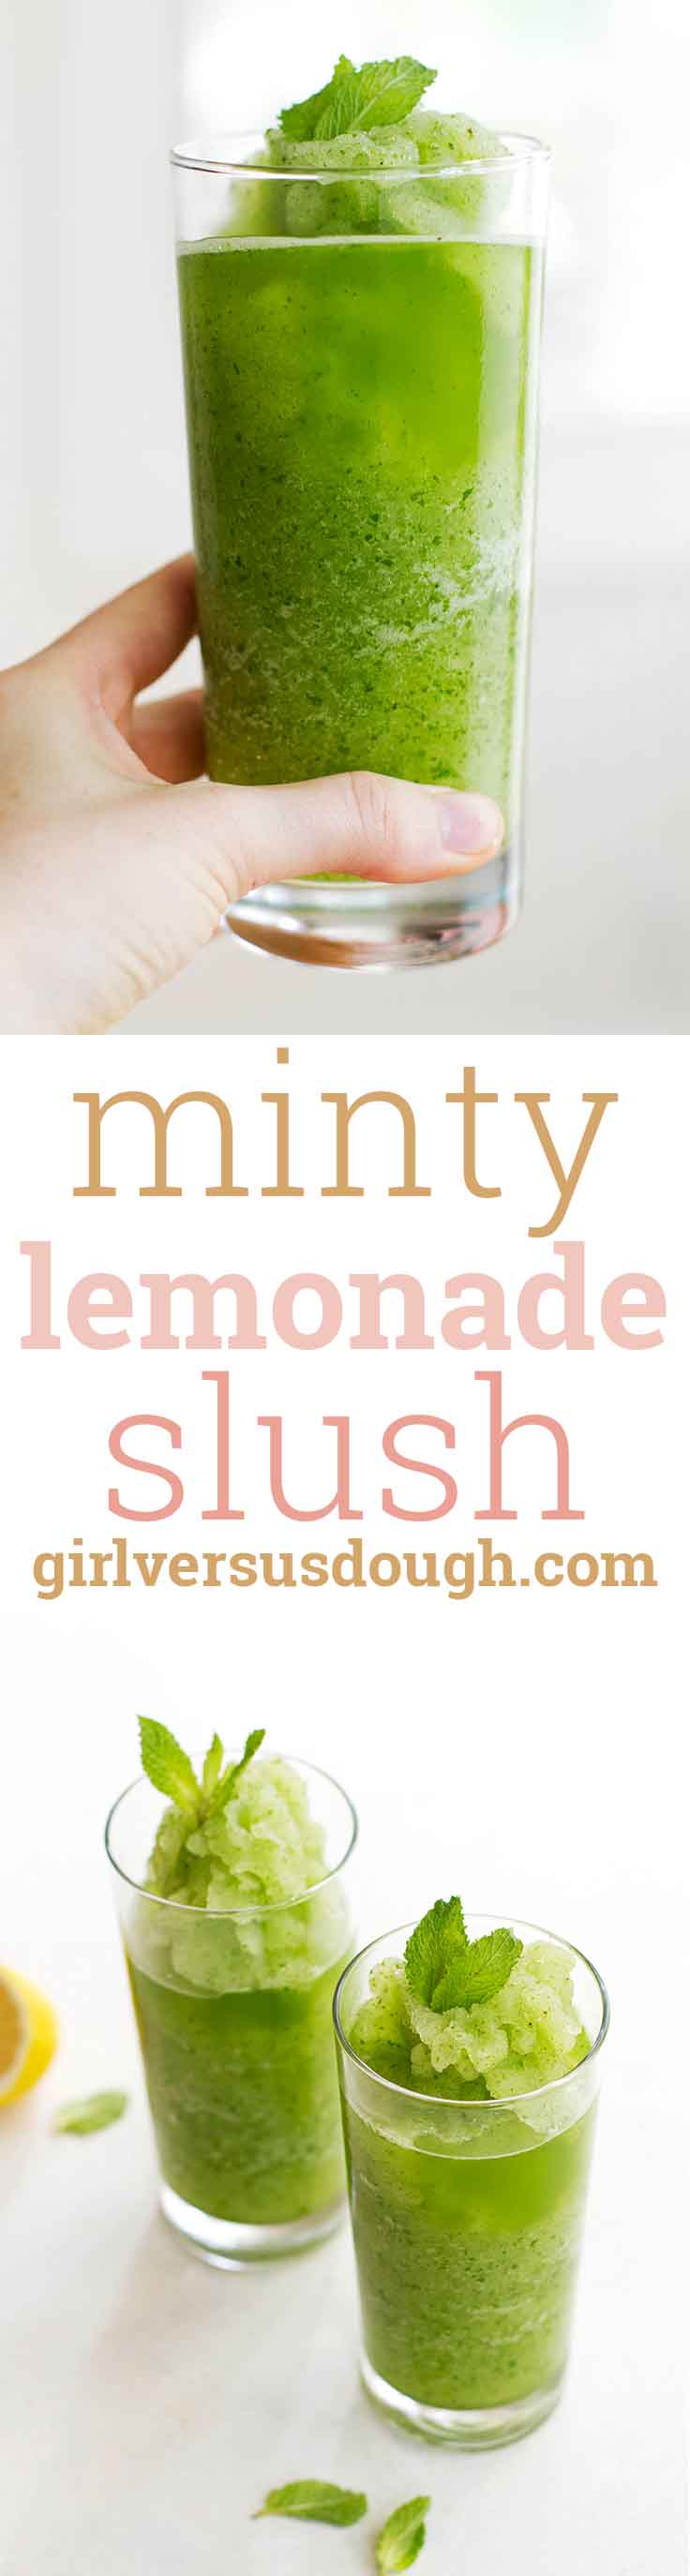 Minty Lemonade Slush -- a refreshing combination of fresh mint, lemon juice, simple syrup and ice makes up this delicious drink. www.girlversusdough.com @girlversusdough